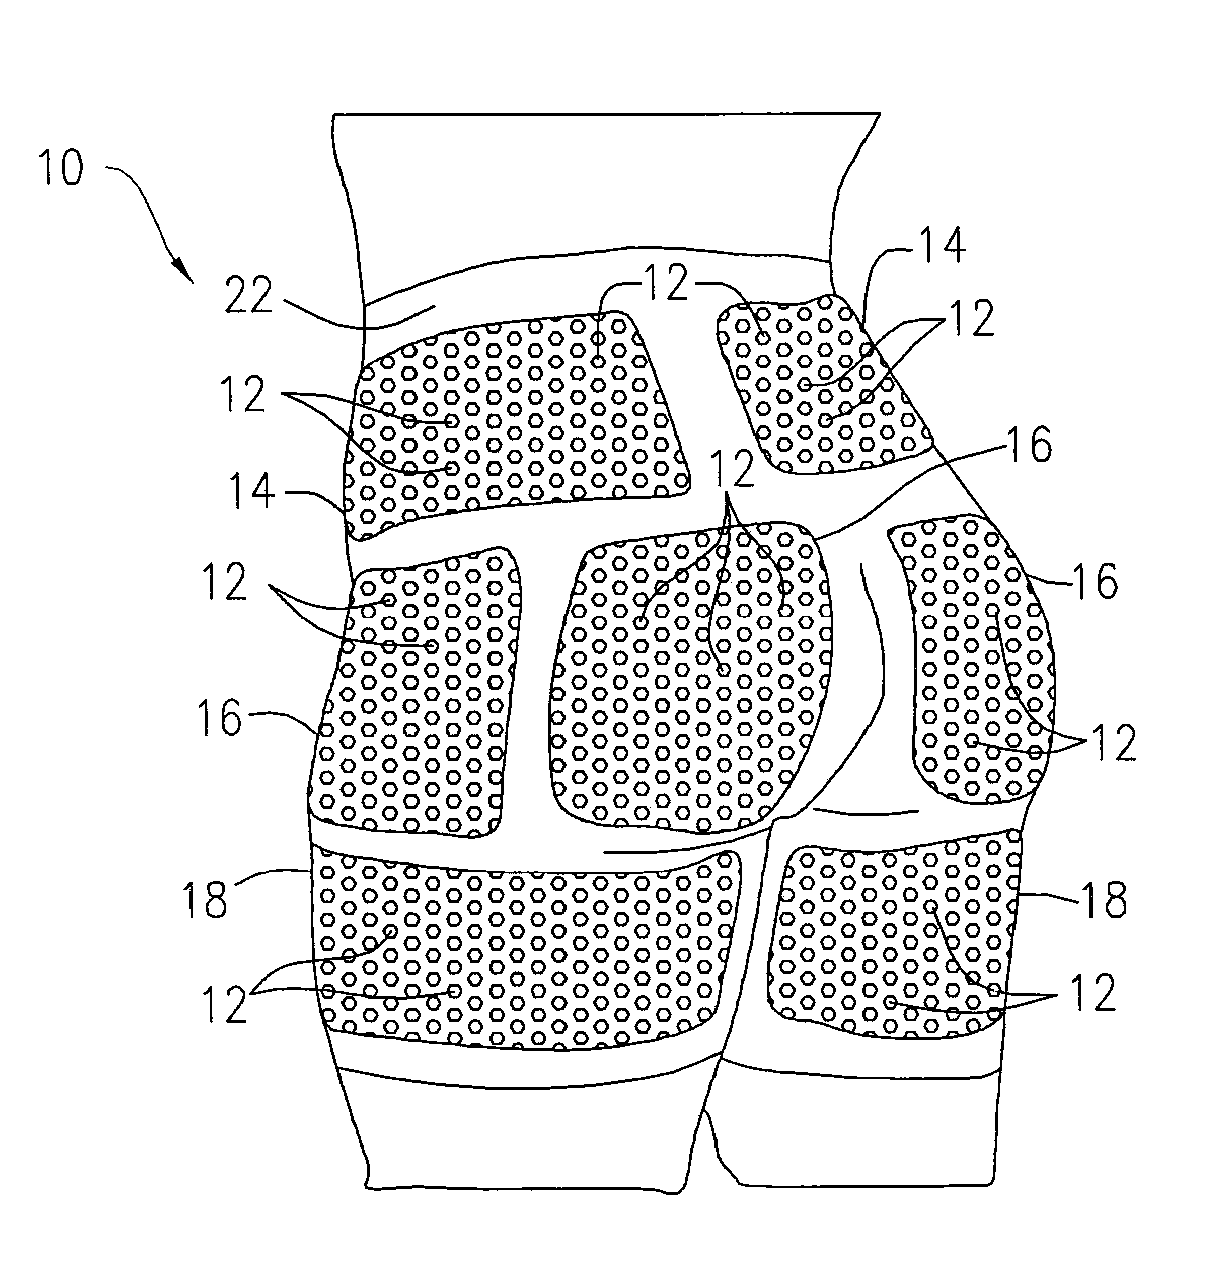 Ultrasonically Assisted Fitness Method and Apparatus